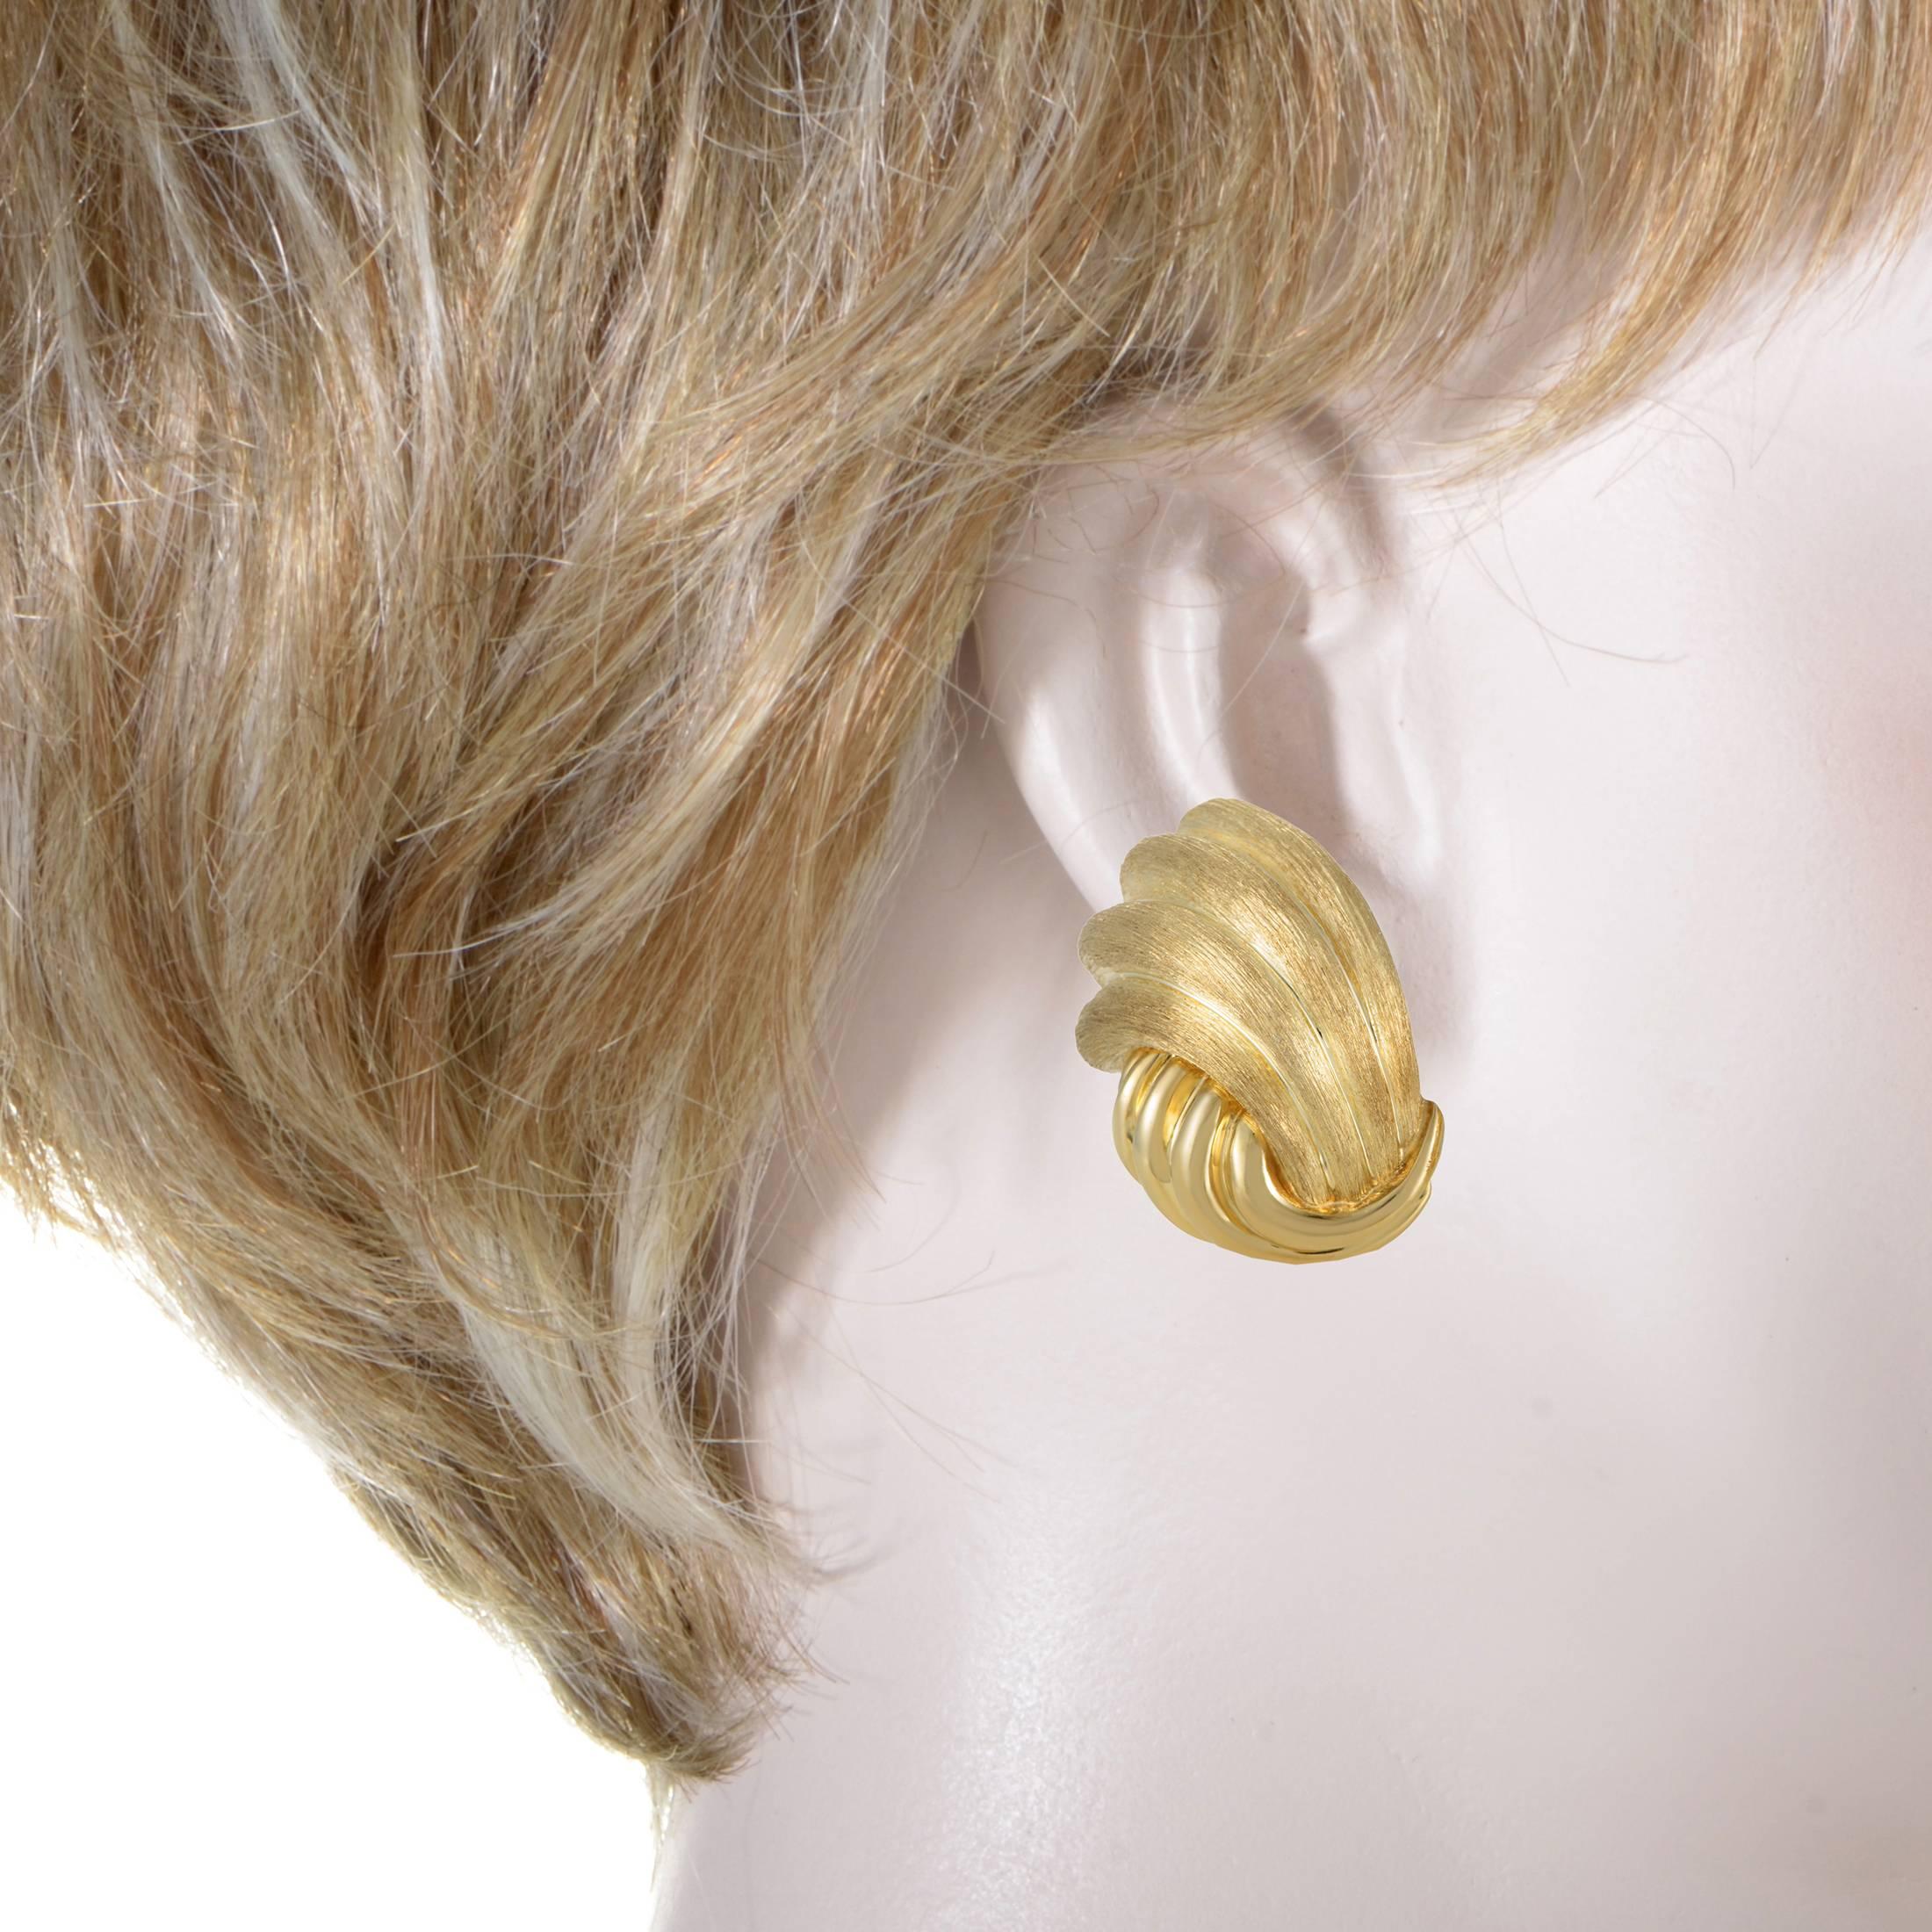 Employing two diverse and exquisite finishes to grace a wonderful shape with fascinating allure, Henry Dunay created these exceptional earrings made of immaculately polished and fine brushed 18K yellow gold for captivating play of light.